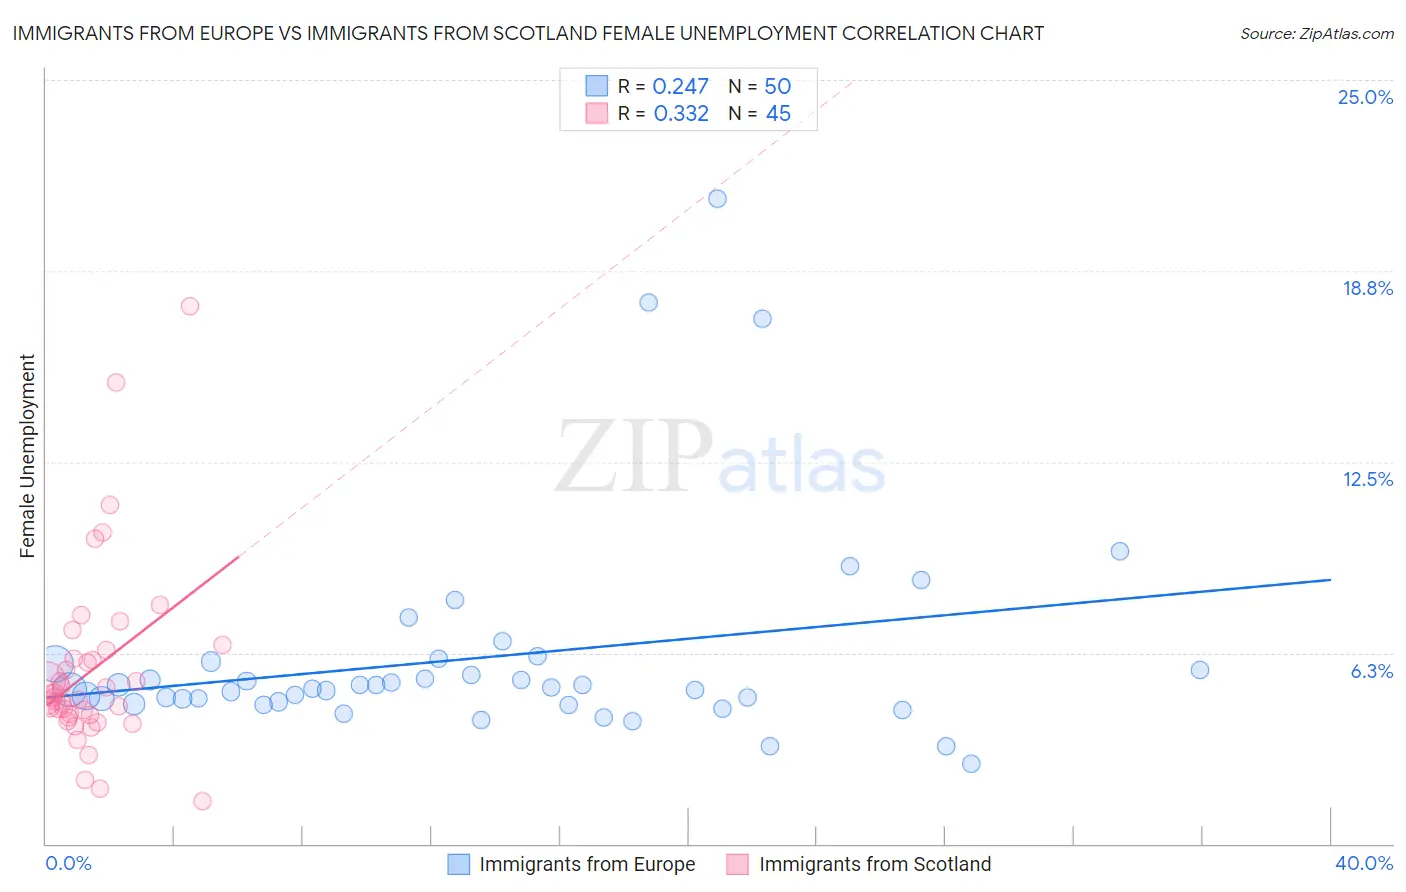 Immigrants from Europe vs Immigrants from Scotland Female Unemployment